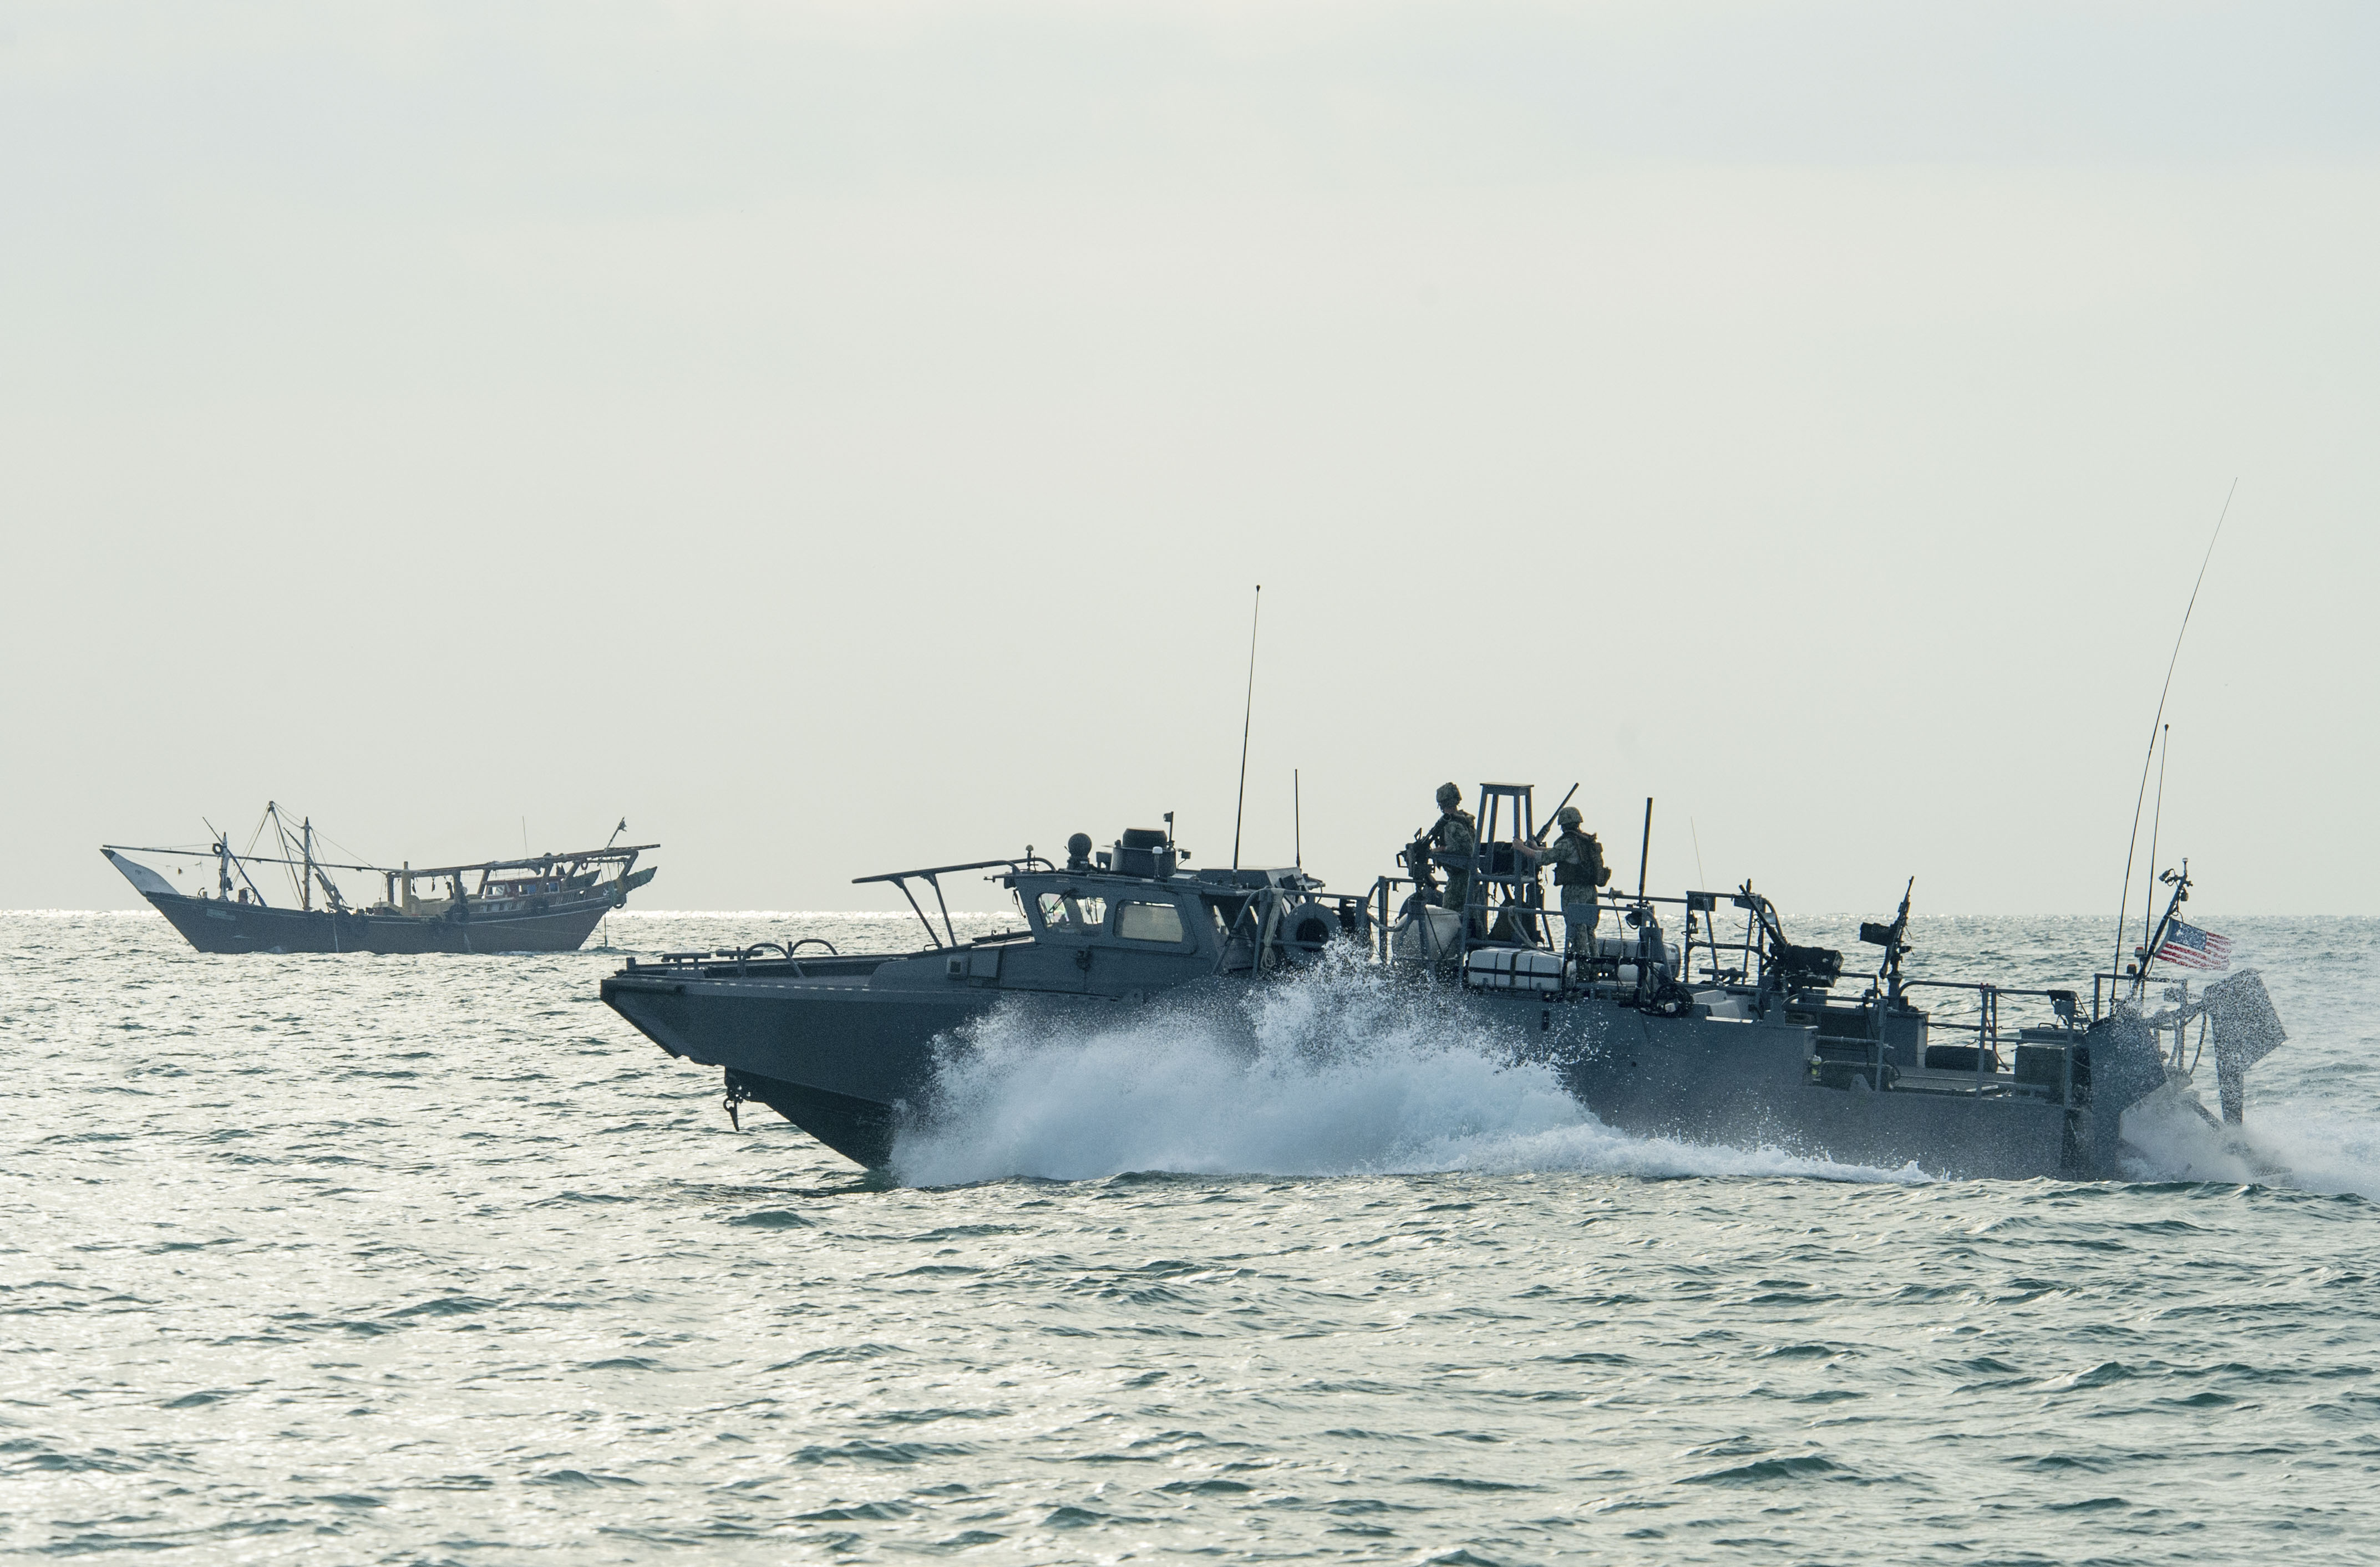 Riverine Command Boat (RCB) 805, assigned to Commander, Task Group (CTG) 56.7, transits through the Persian Gulf during patrol operations on Nov. 2, 2015. US Navy Photo